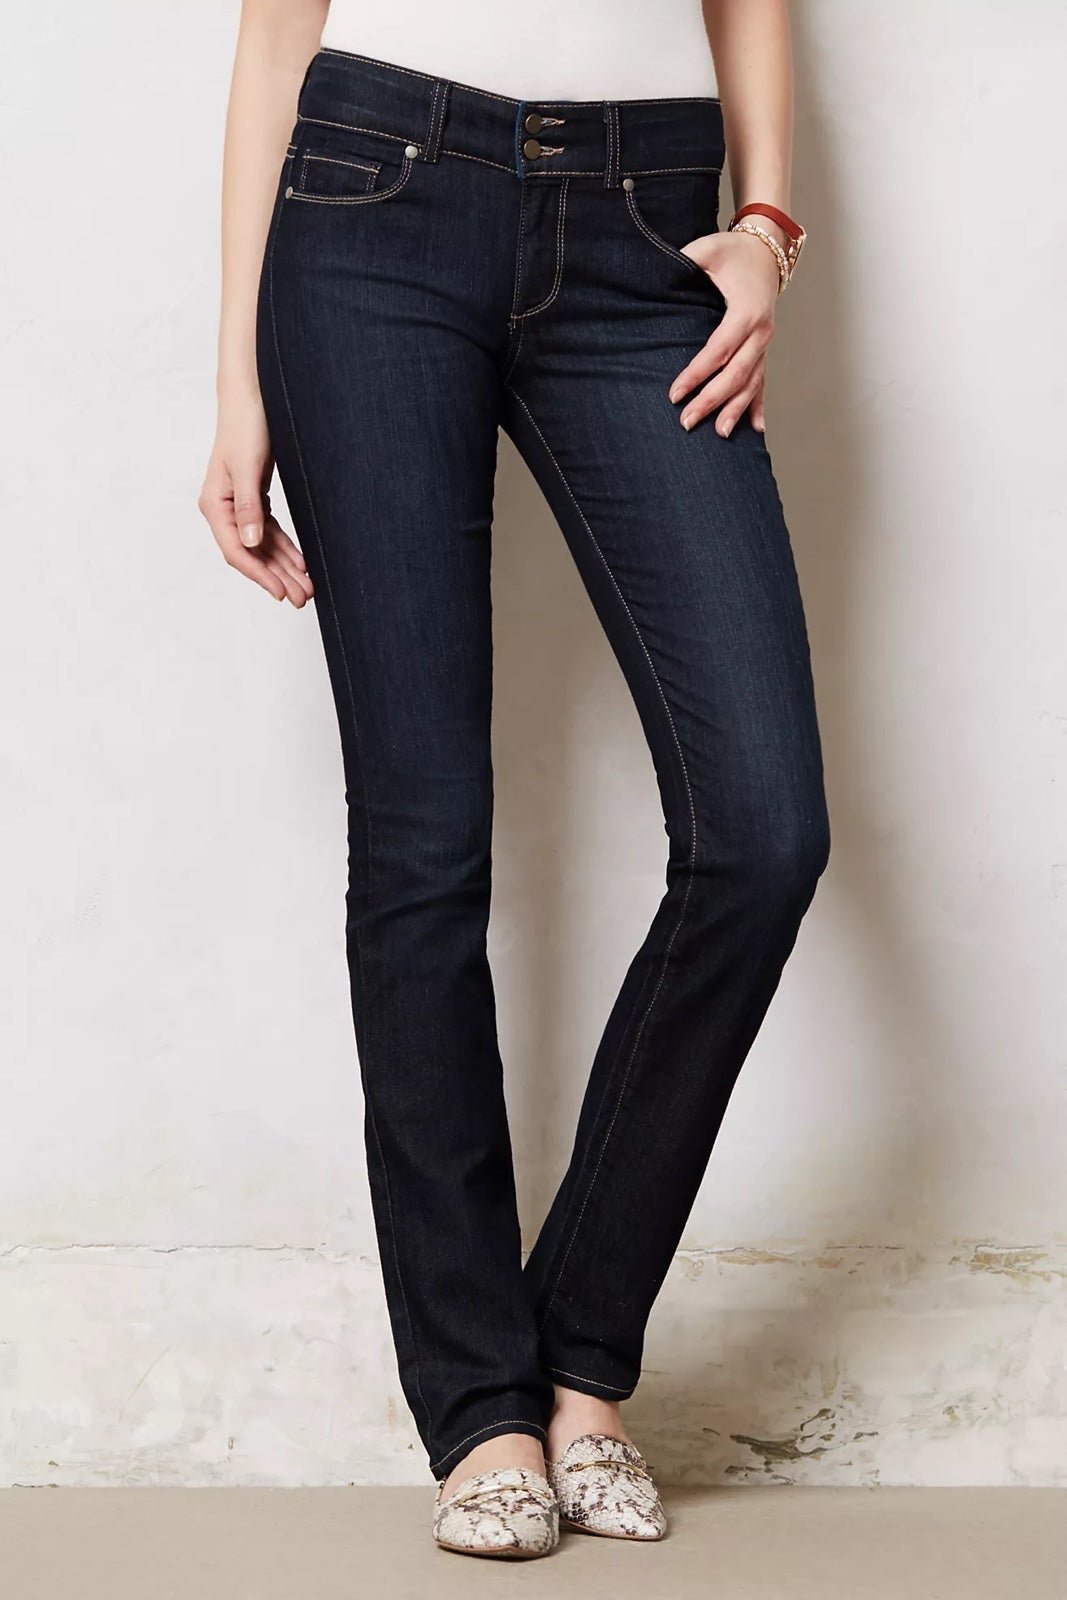 Perfect Paige Hidden Hills Straight Jeans Women’s Size 